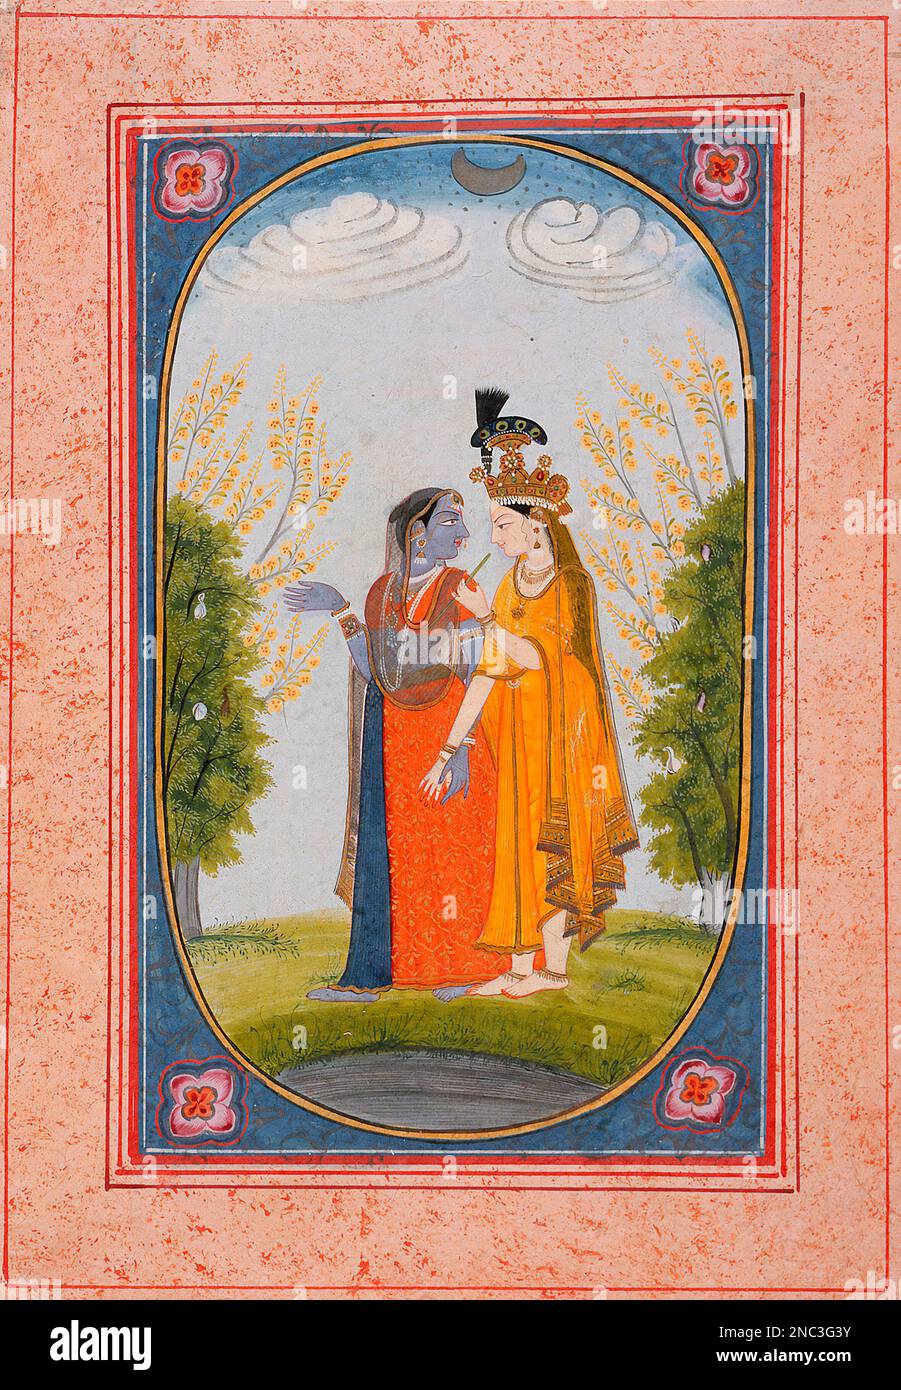 Krishna and Radha, unknown artist, opaque watercolor and gold on paper, c. 1800-25 Stock Photo